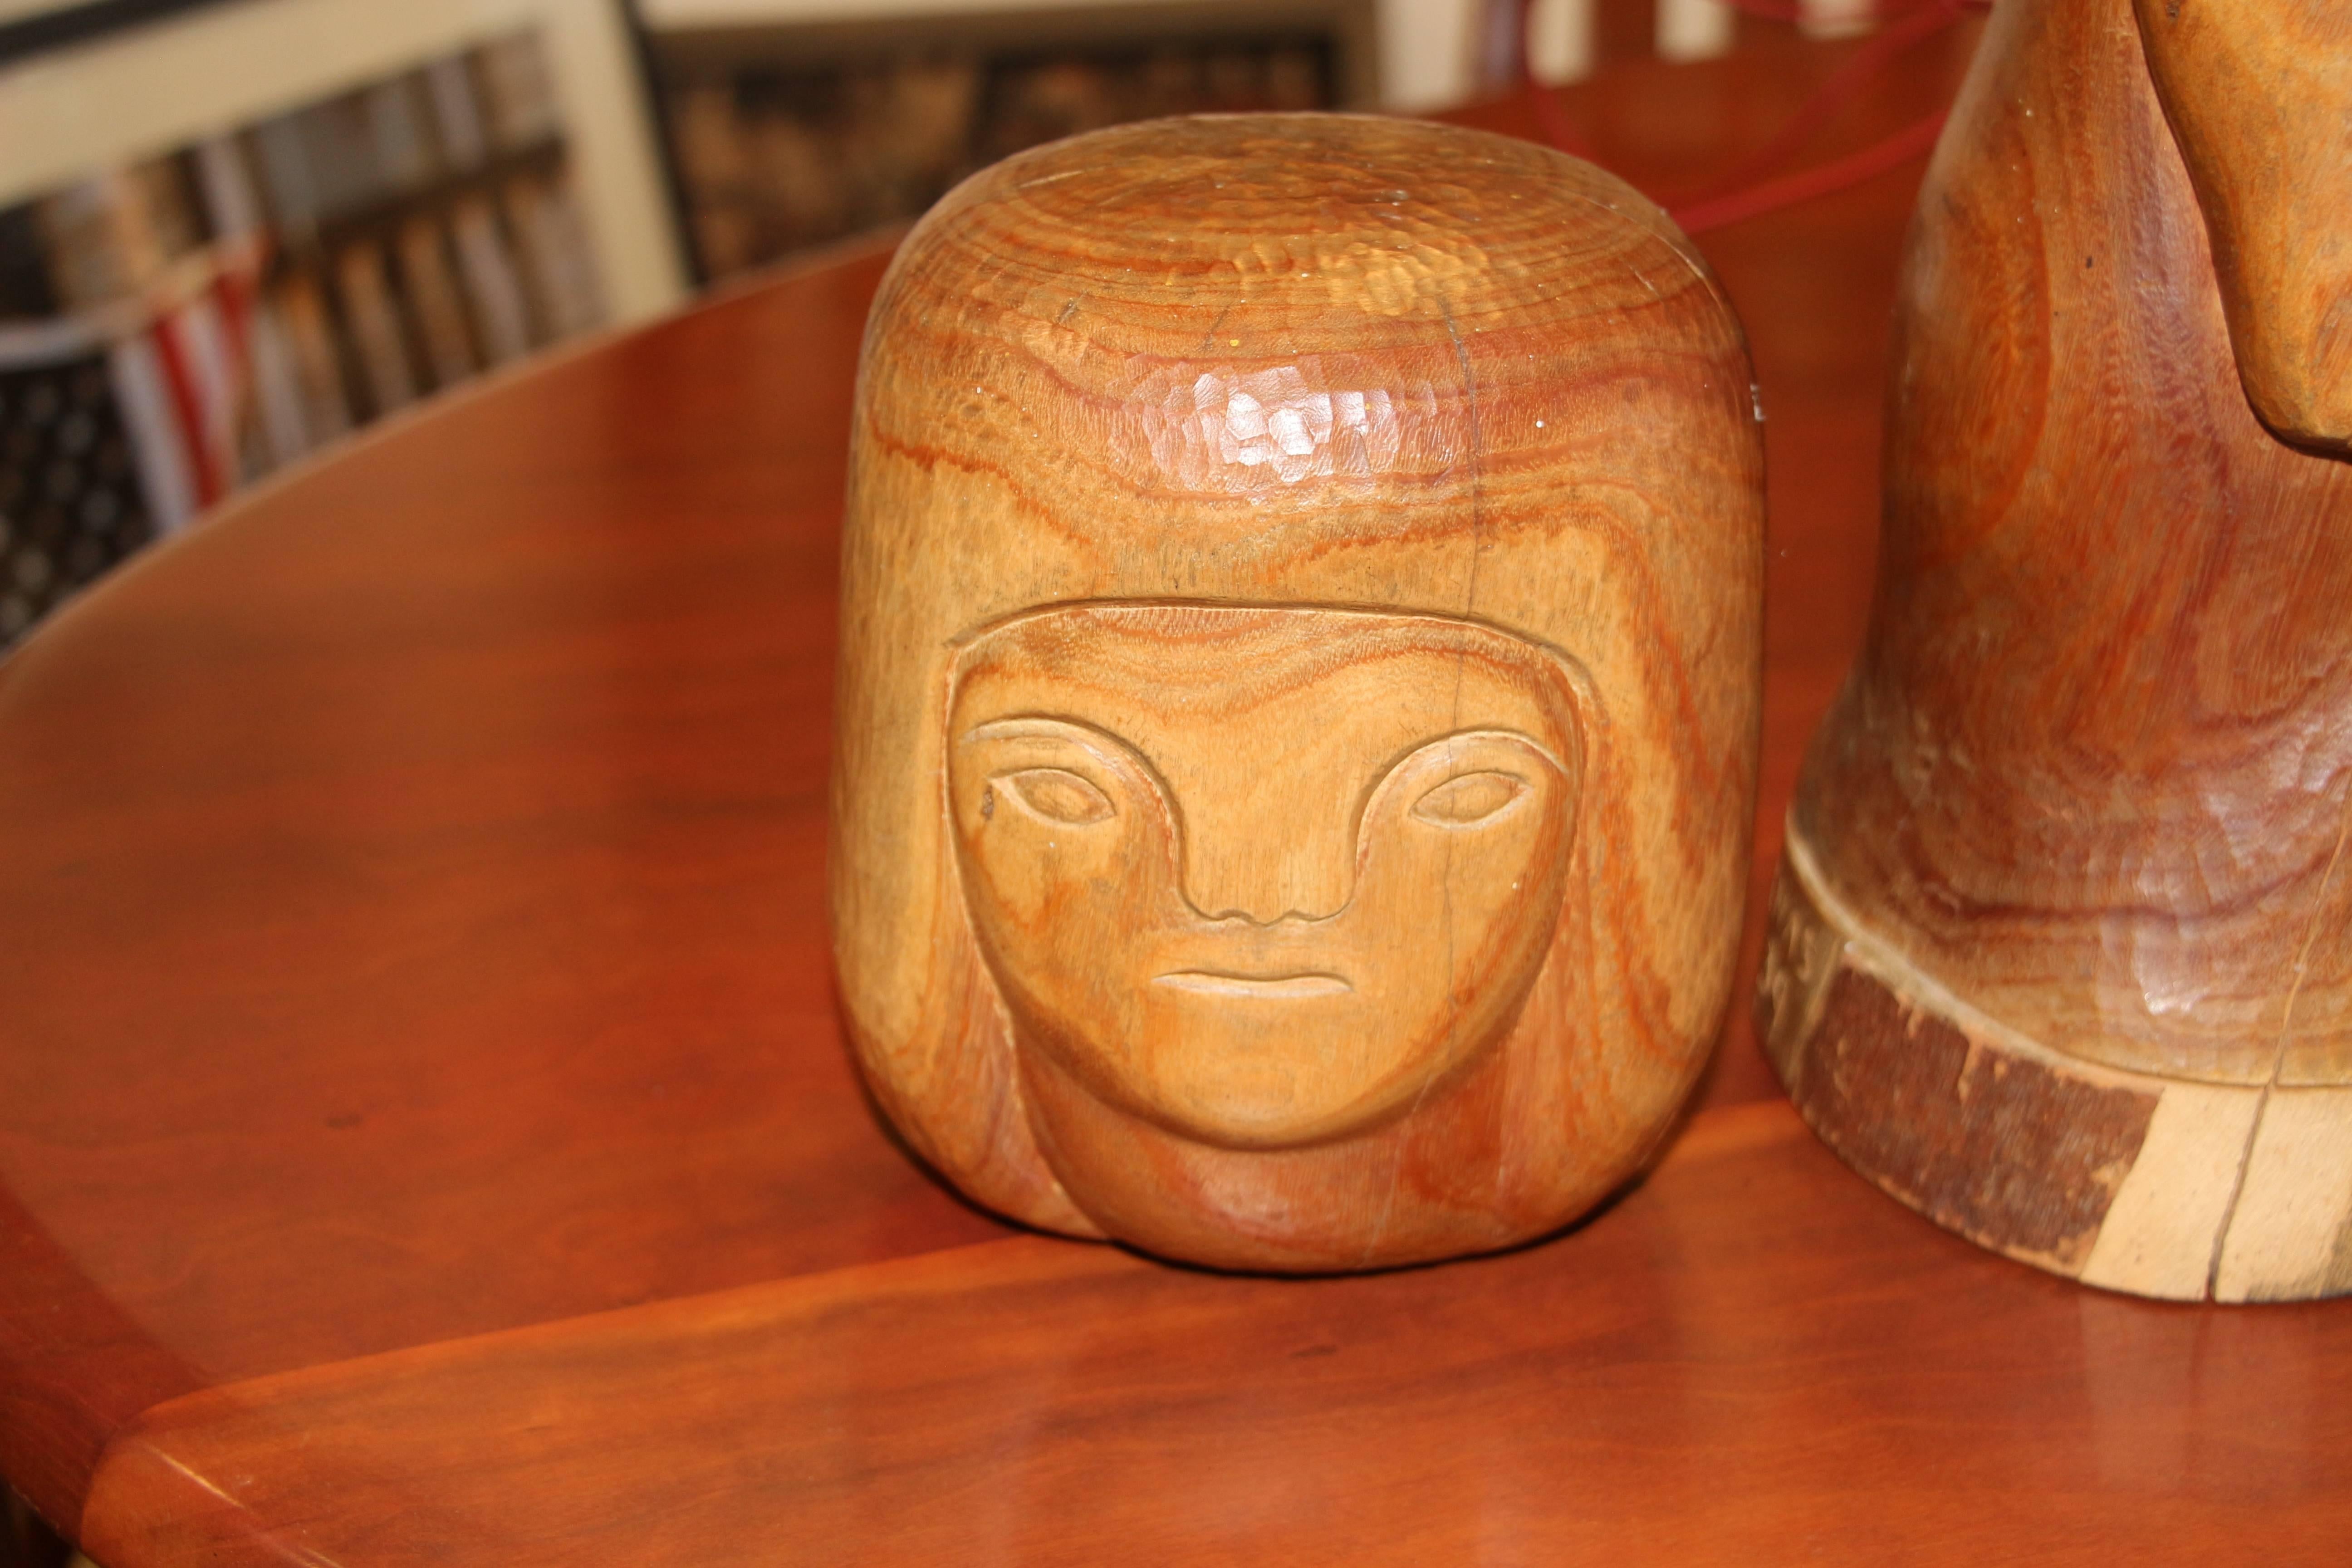 Two unusual wood carvings signed Cardenas and dated 1939. Not sure who the artist is but they are whimsical. The taller one has some missing, bark like material missing from the base. Both are cracked scratched and show nicks and marks from age. The